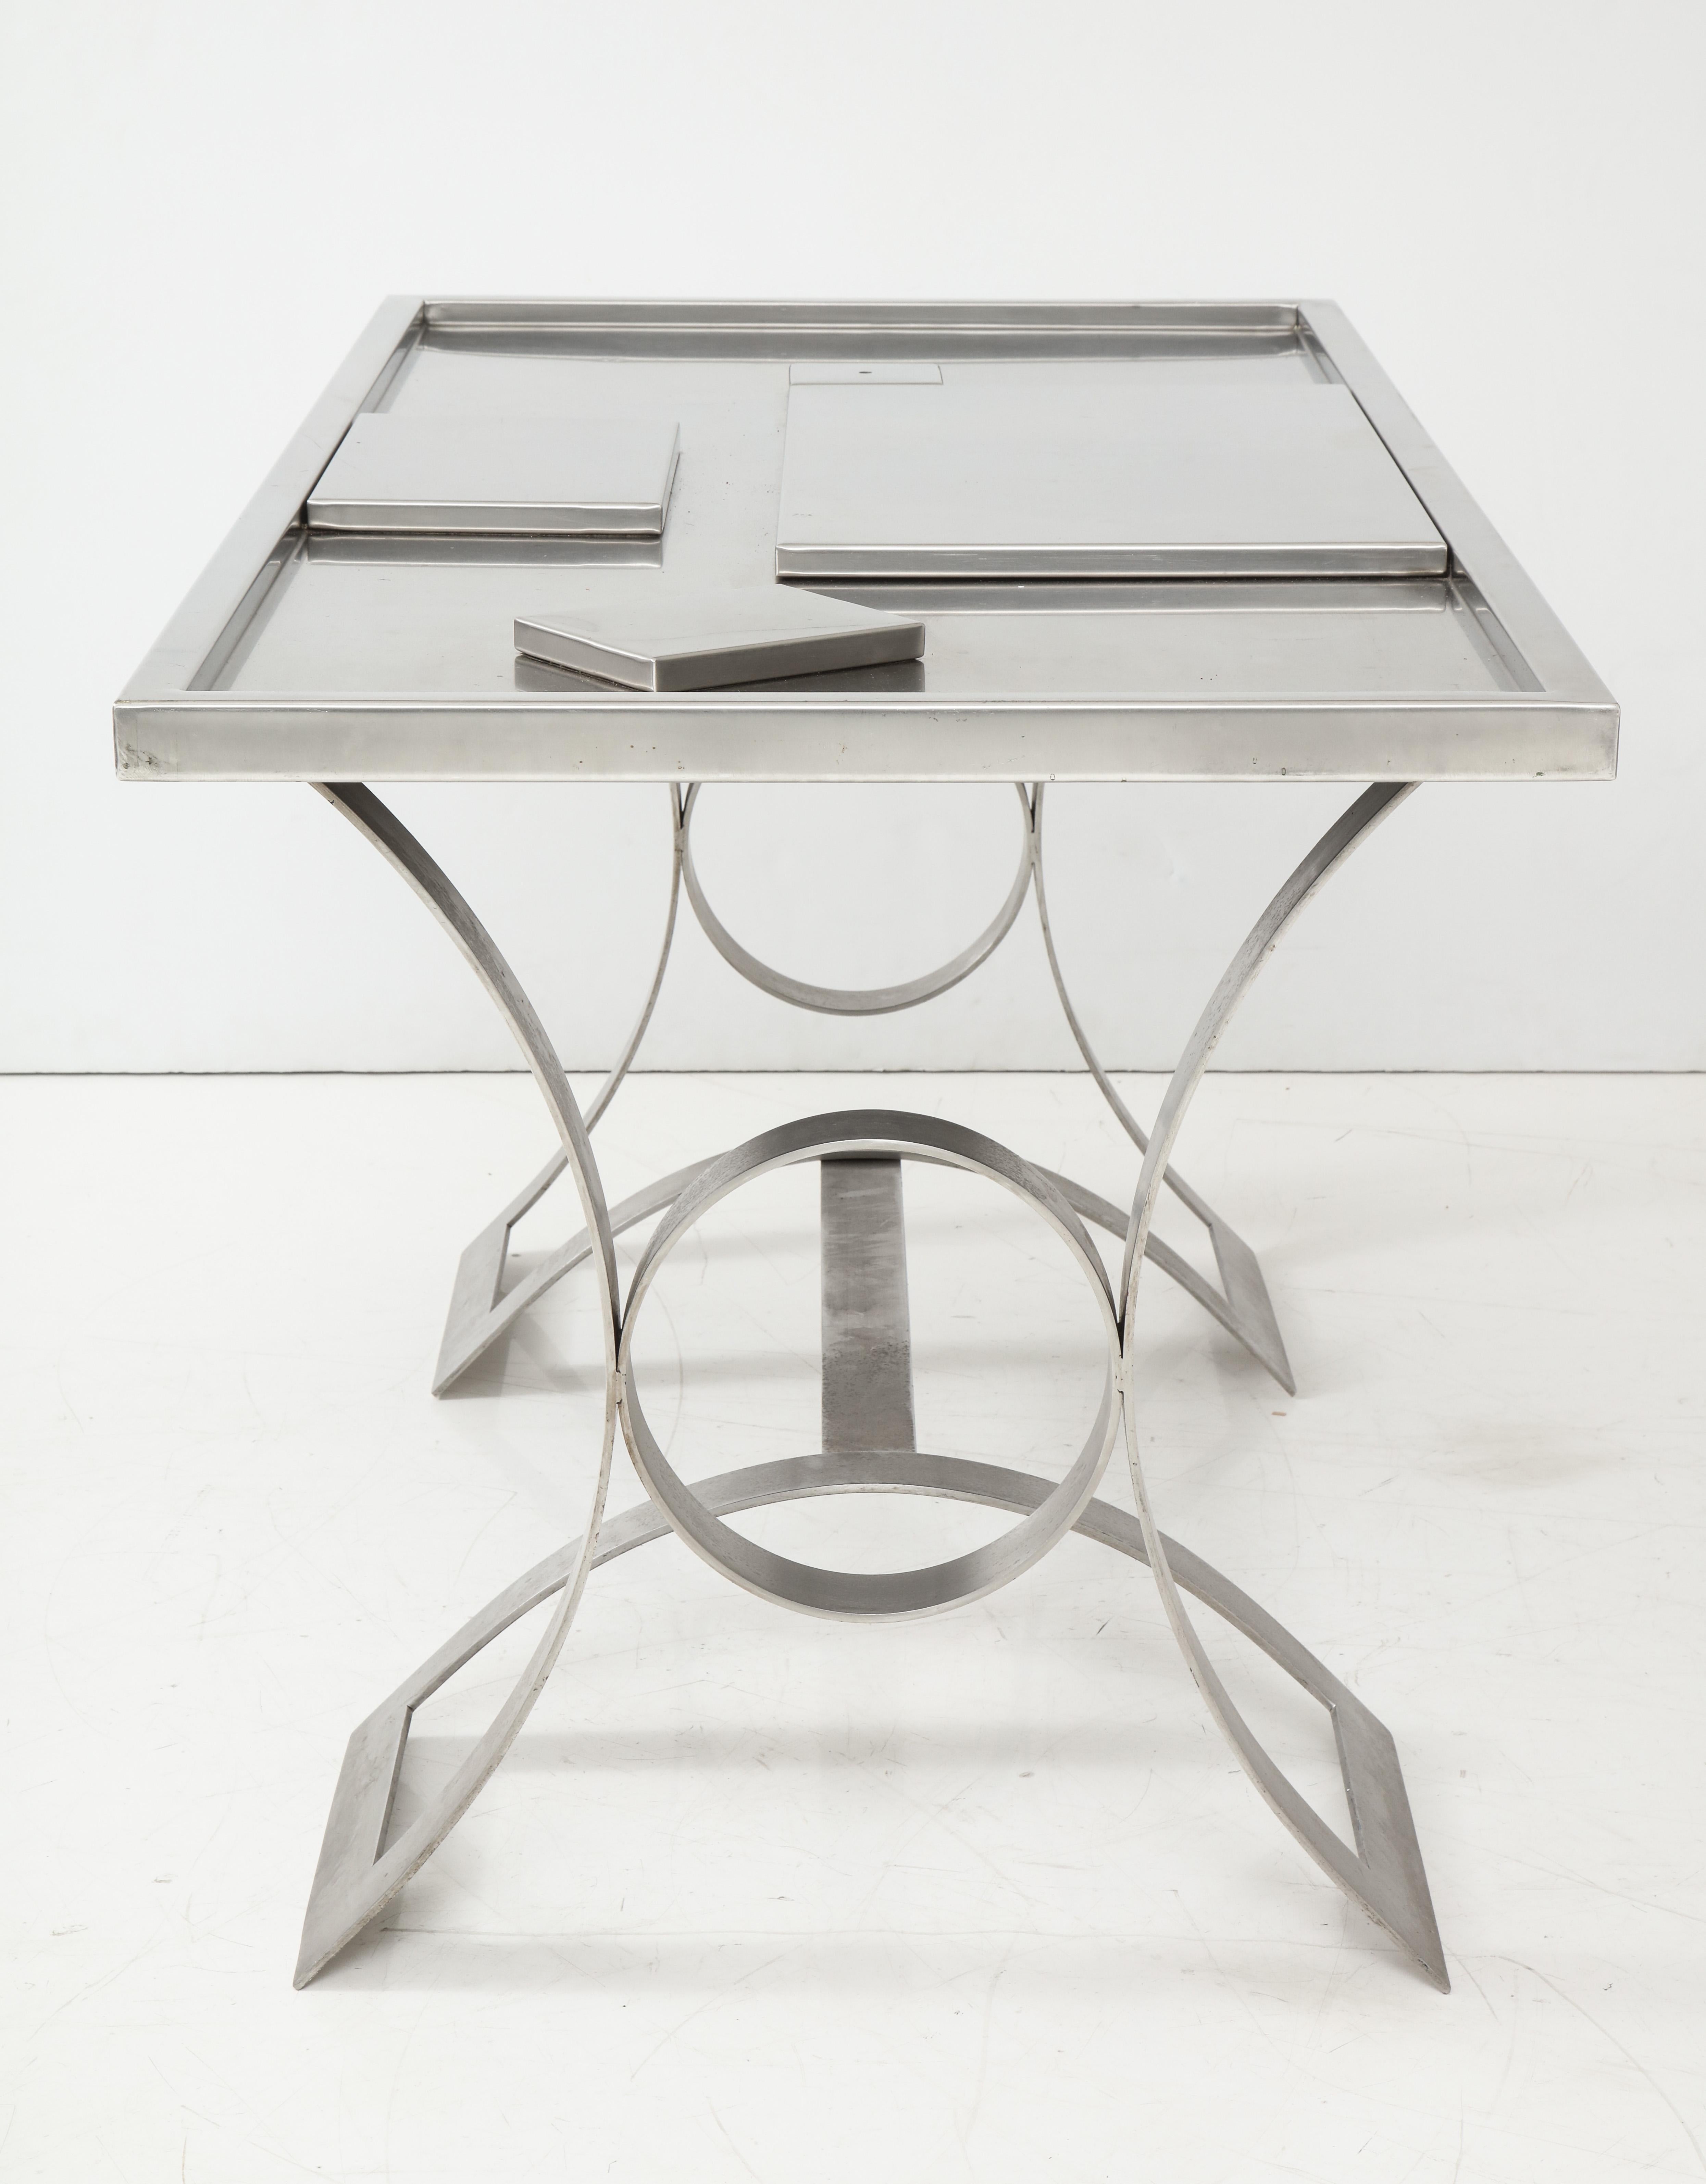 Rare Stainless Steel Desk with Smoked Grey Glass Top, France, c. 1970 For Sale 10